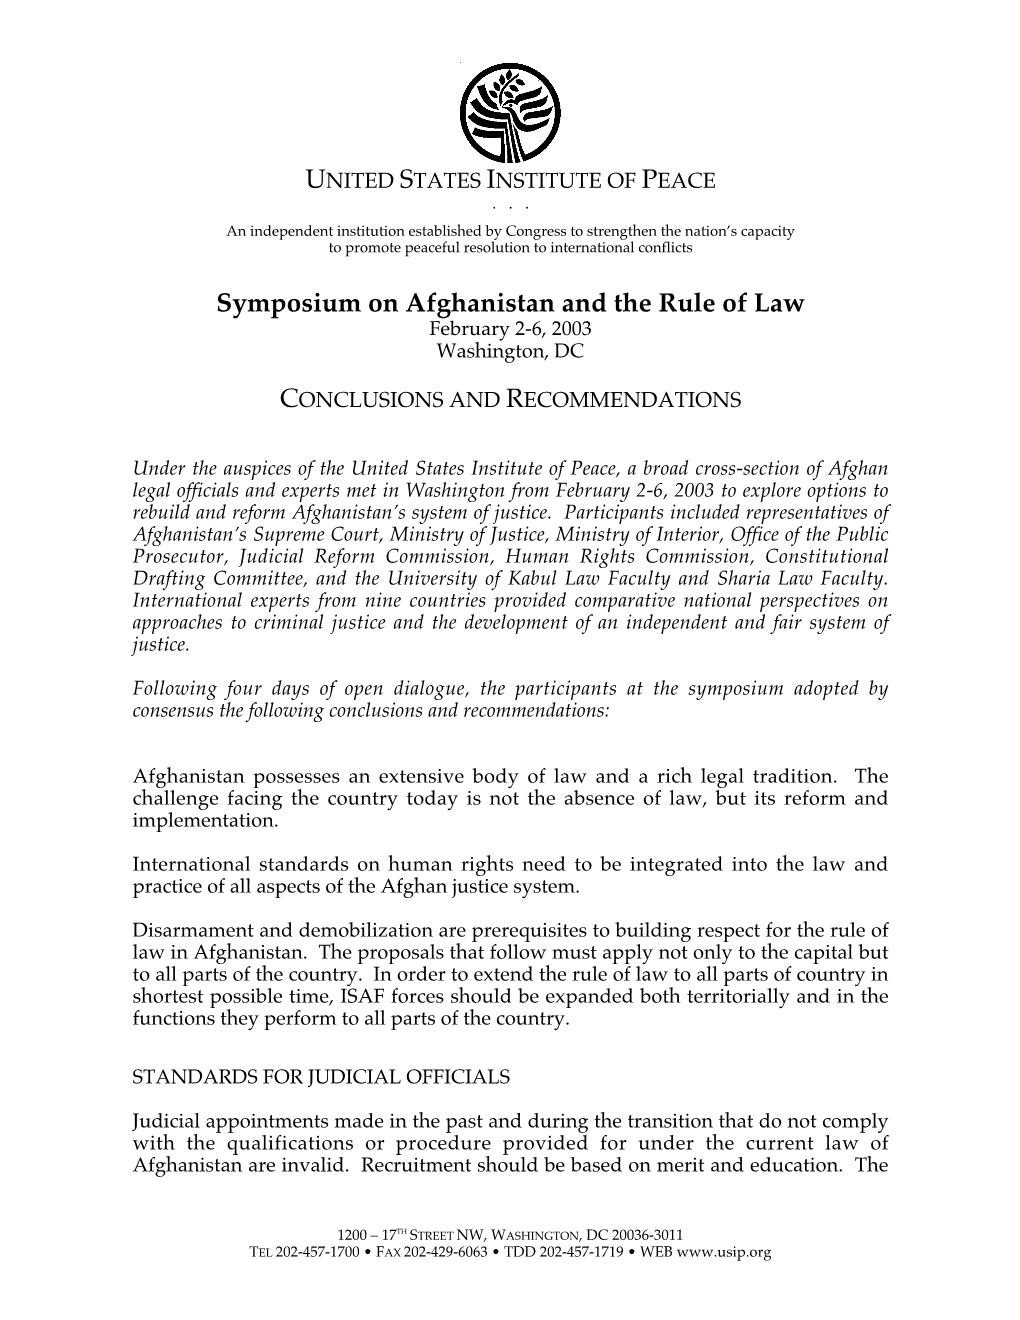 Symposium on Afghanistan and the Rule of Law February 2-6, 2003 Washington, DC